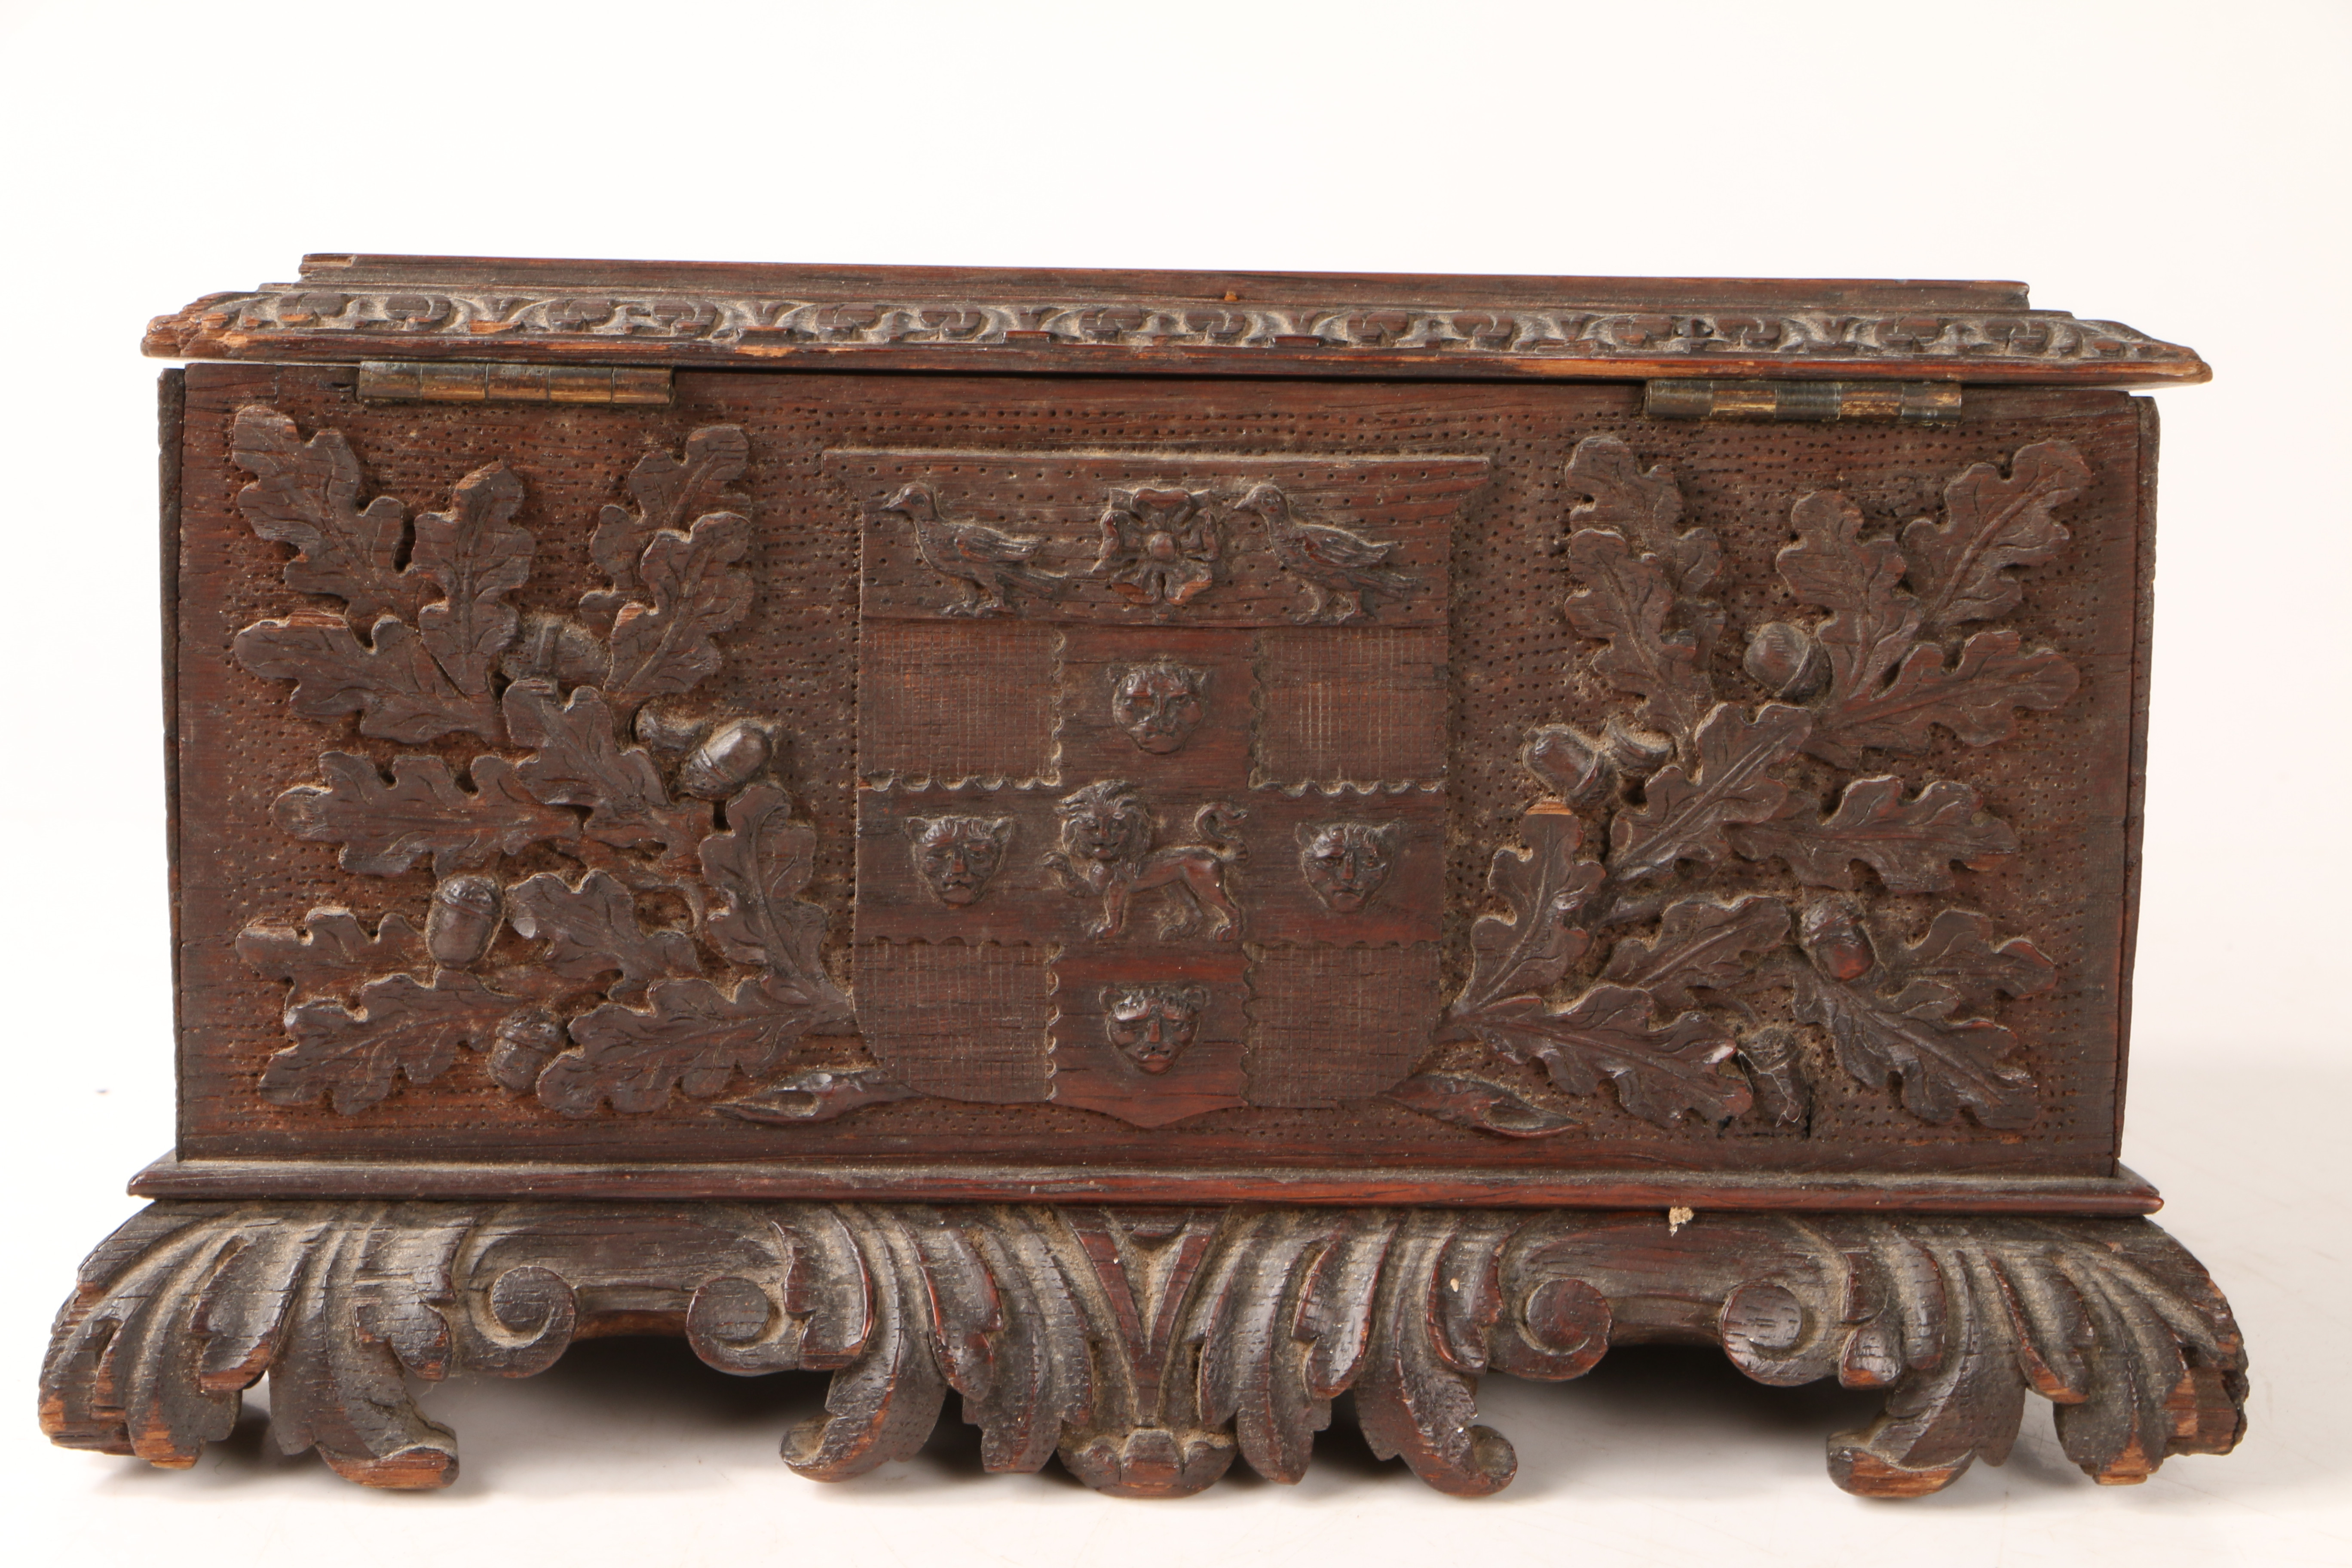 CHRIST CHURCH INTEREST - A 19TH CENTURY CARVED OAK BOX. - Image 6 of 10